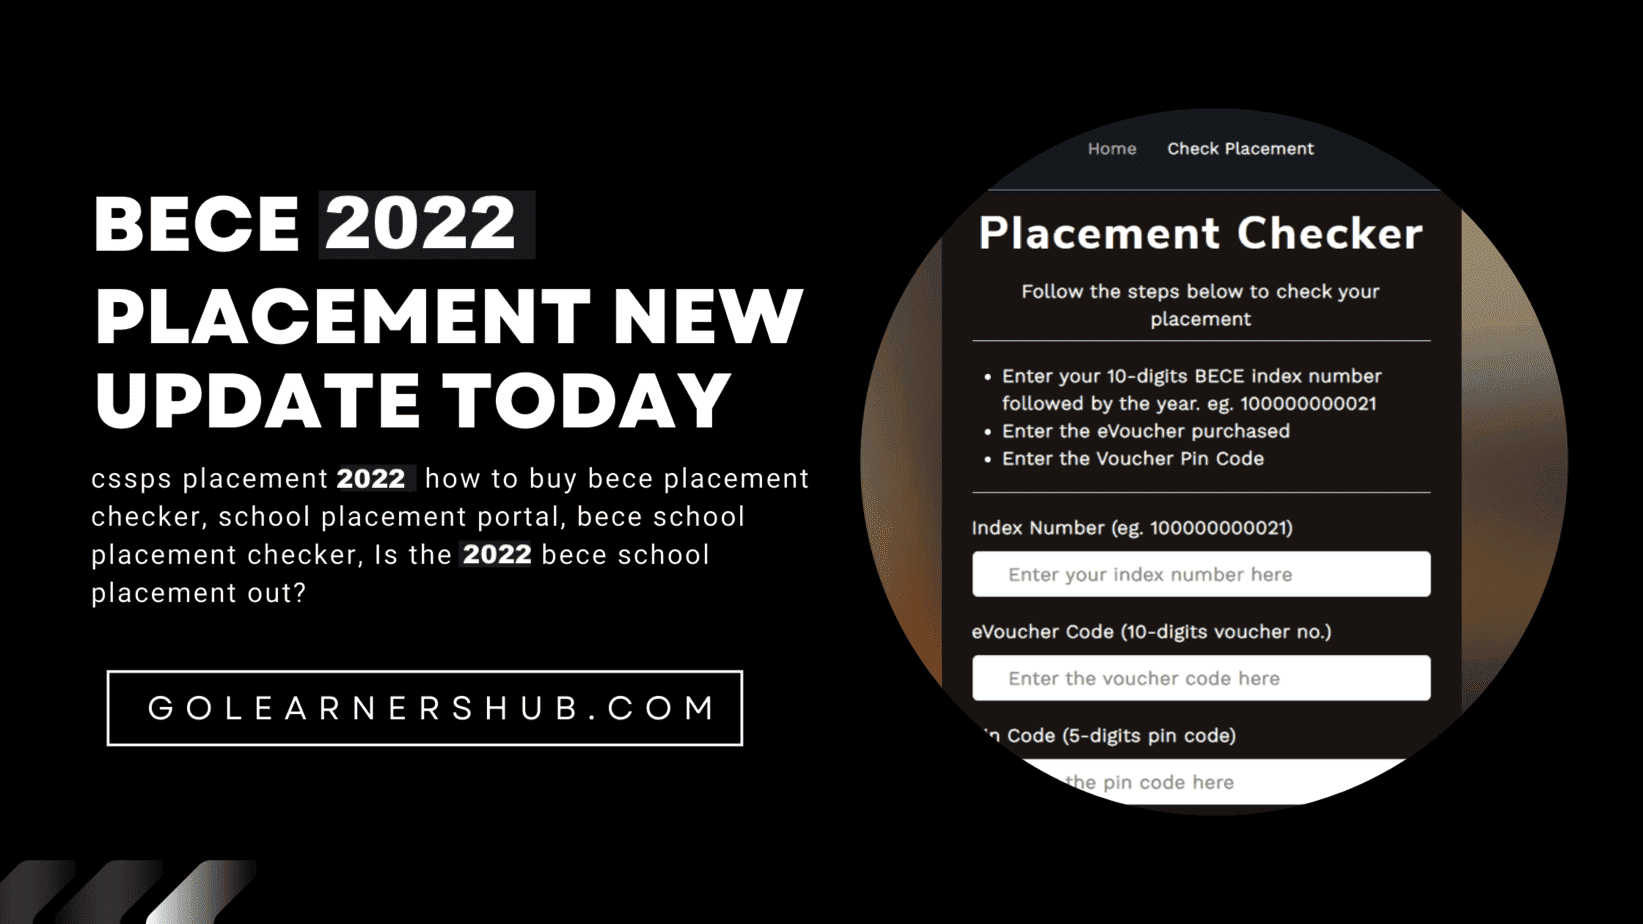 BECE 2022 Placement New Update Today, Details Here